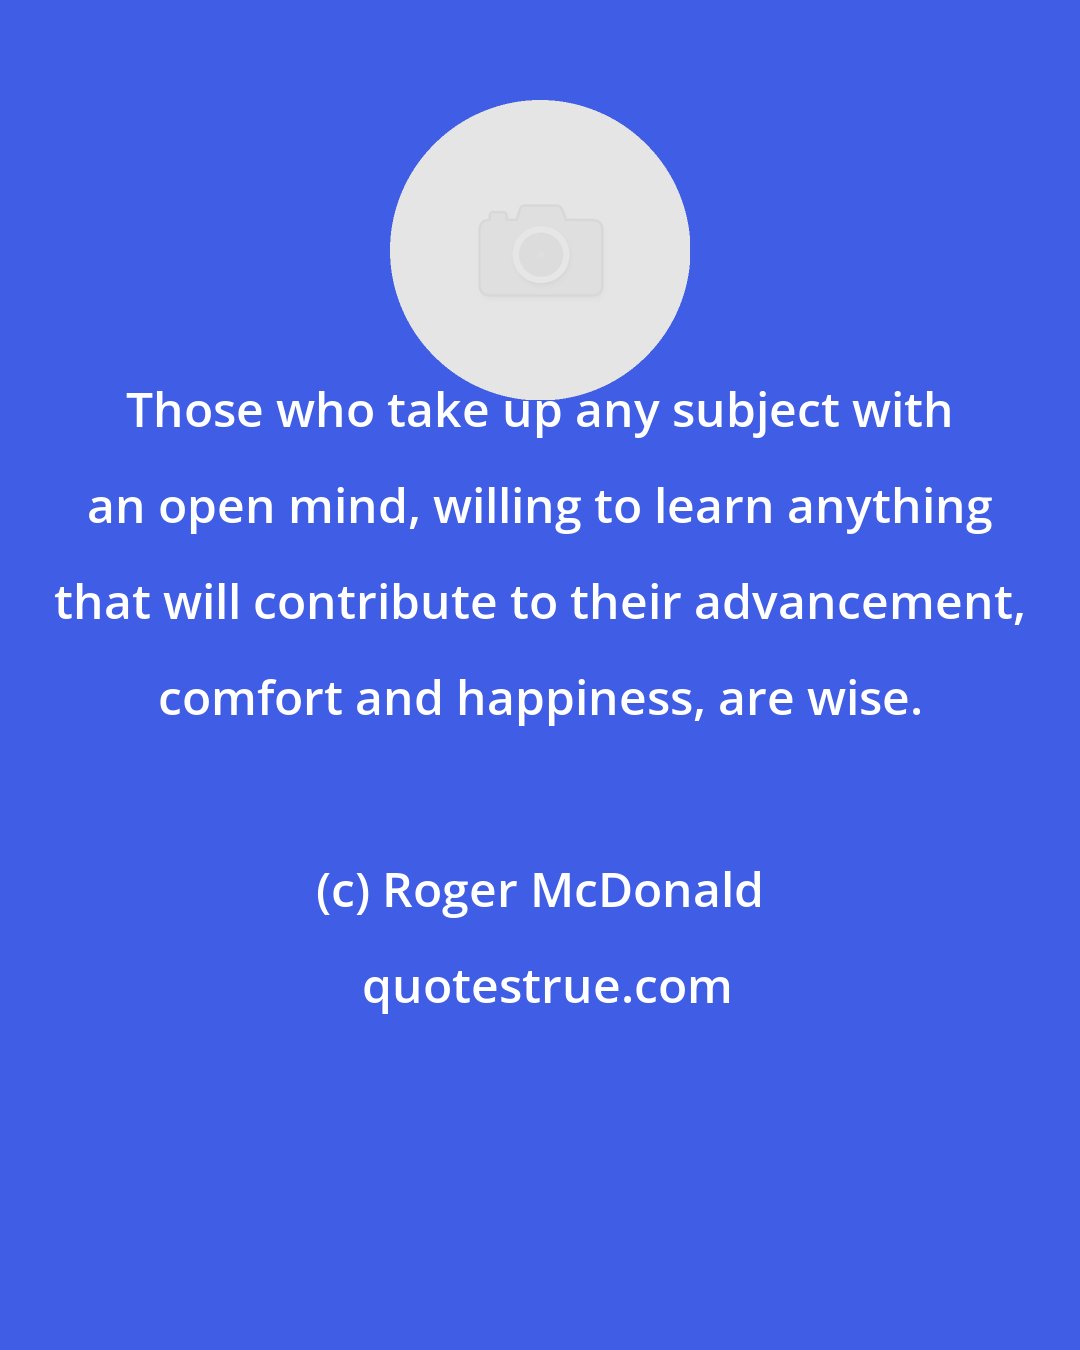 Roger McDonald: Those who take up any subject with an open mind, willing to learn anything that will contribute to their advancement, comfort and happiness, are wise.